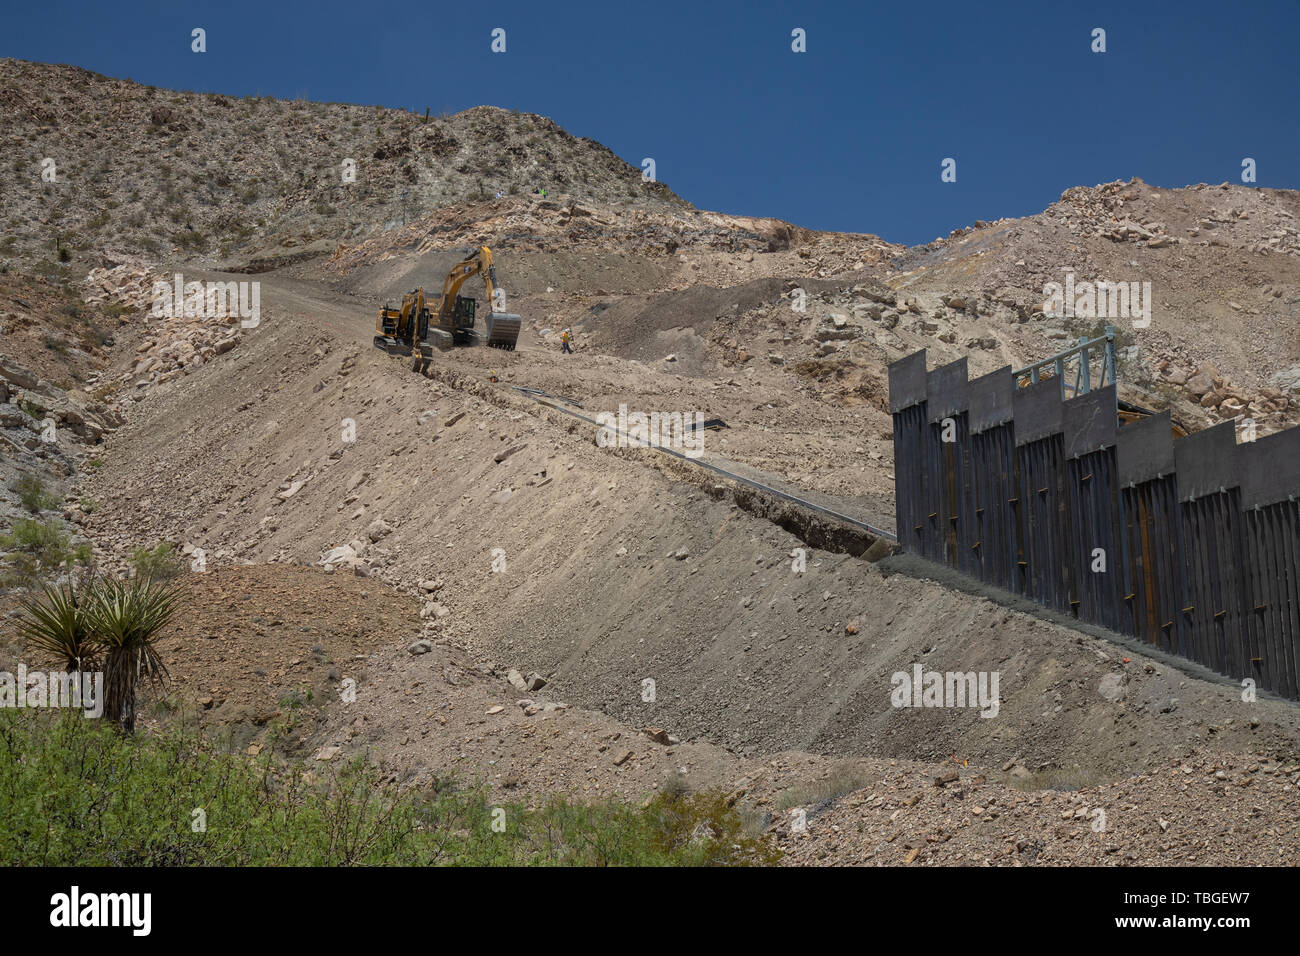 Construction continues on the privately-funded border wall in Sunland Park, New Mexico, near El Paso, Texas, on 30 May 2019 Stock Photo